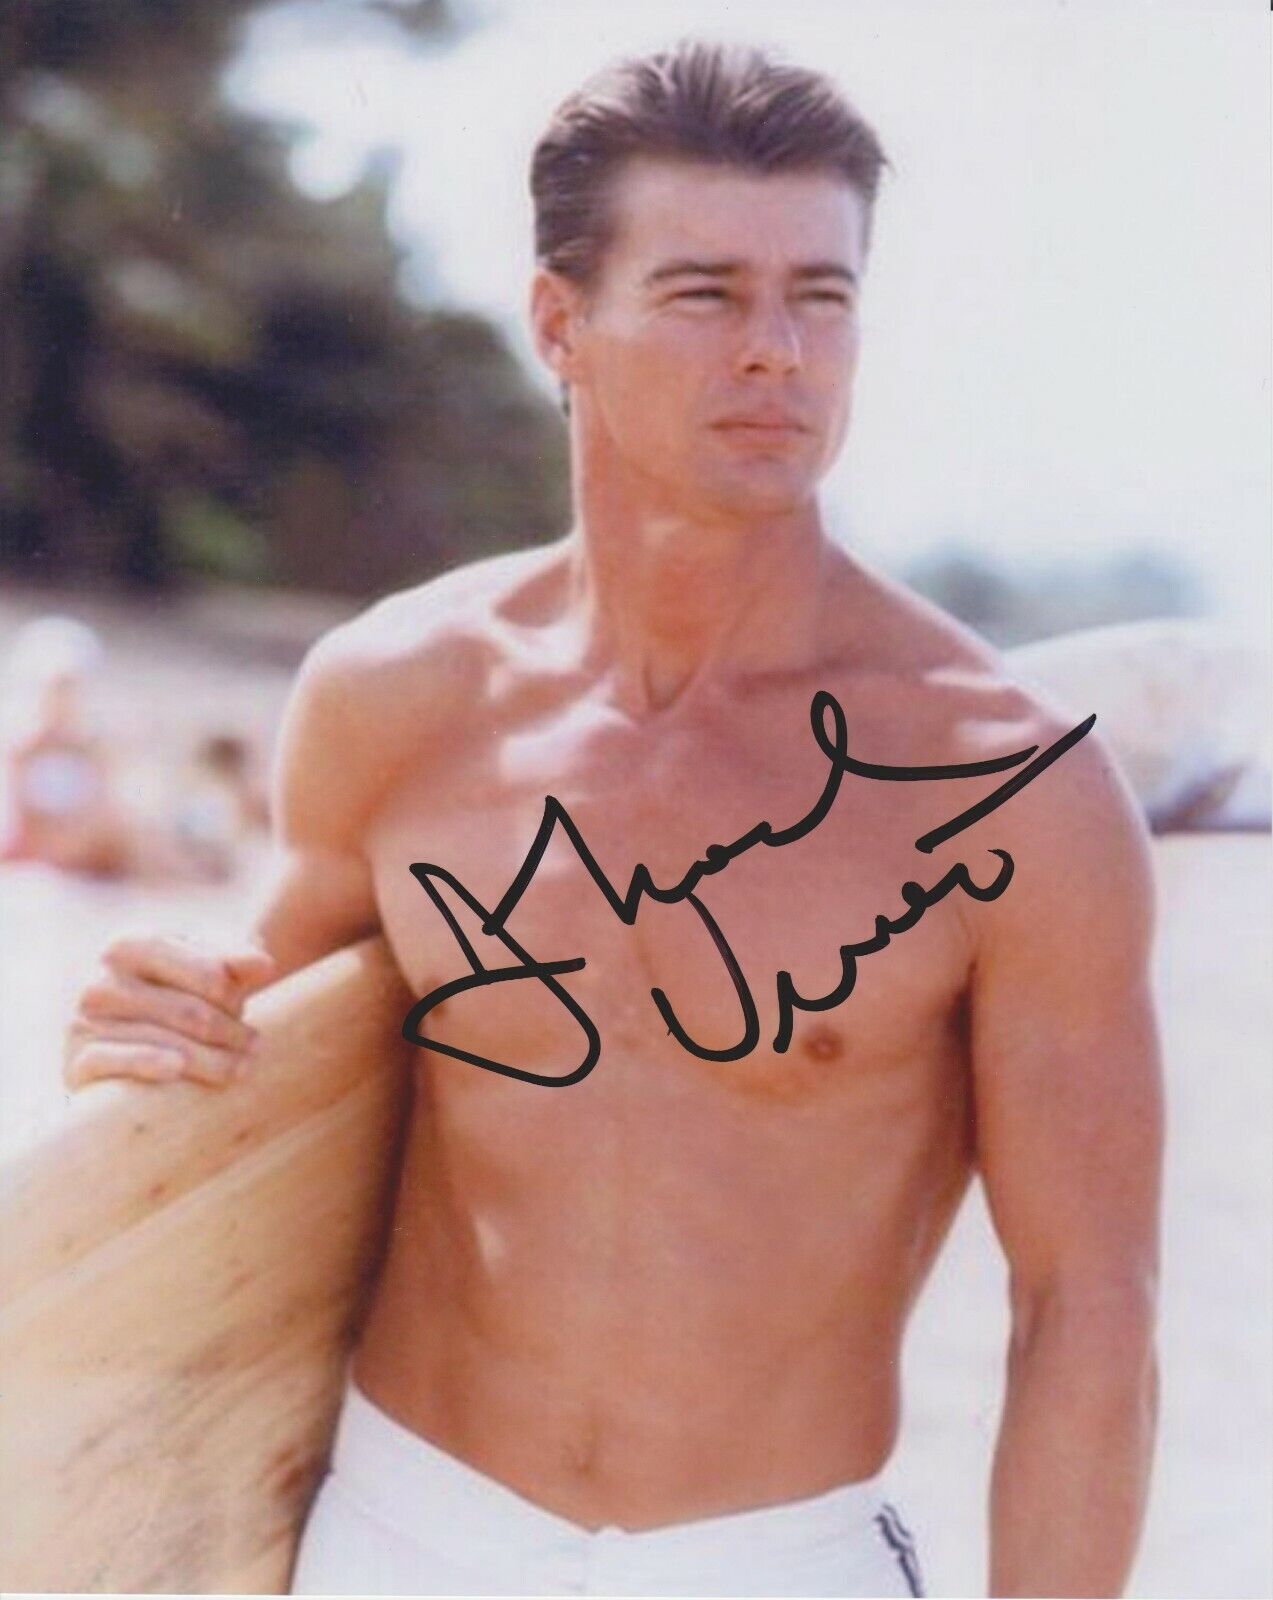 Jan-Michael Vincent Signed 8x10 Photo Poster painting - BIG WEDNESDAY SHIRTLESS!!! SEXY!!!